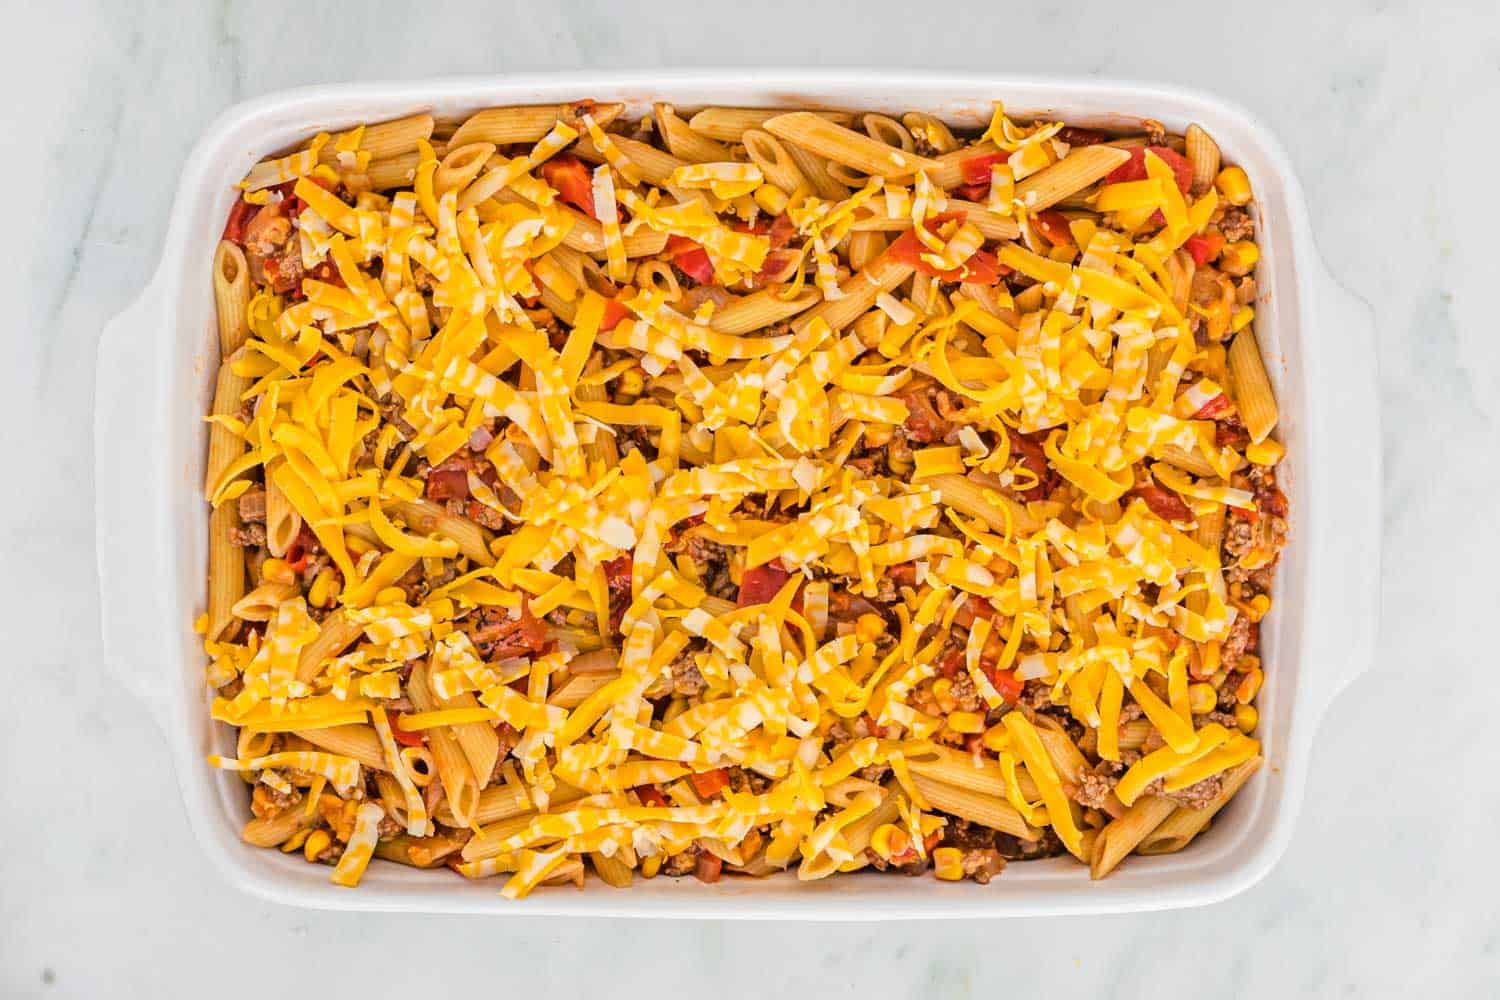 Sloppy Joe Casserole topped with cheese before baking.